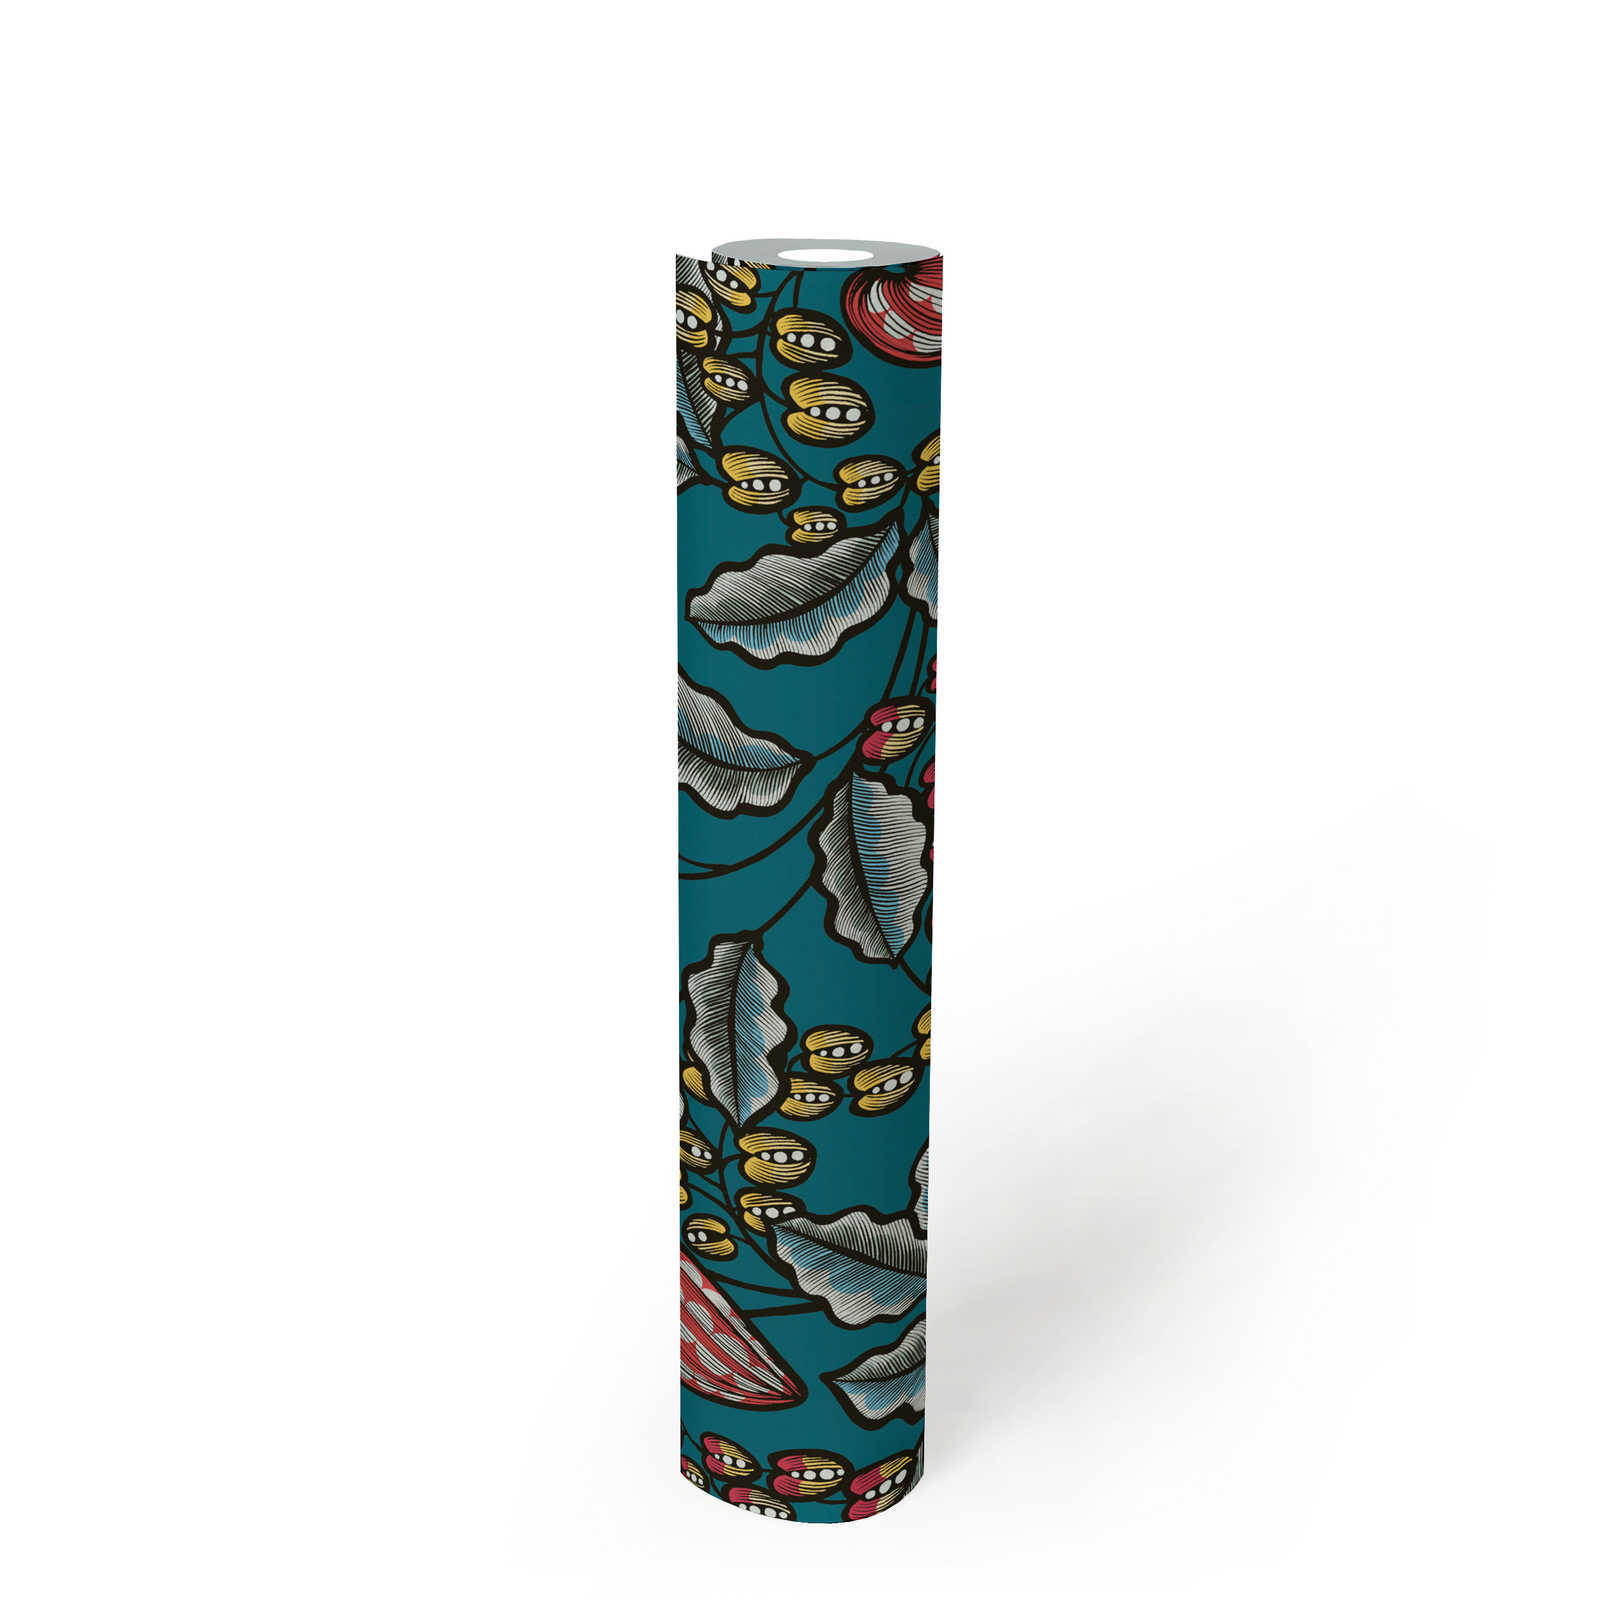             Floral wallpaper leaves & flowers in modern art style - blue, yellow, red
        